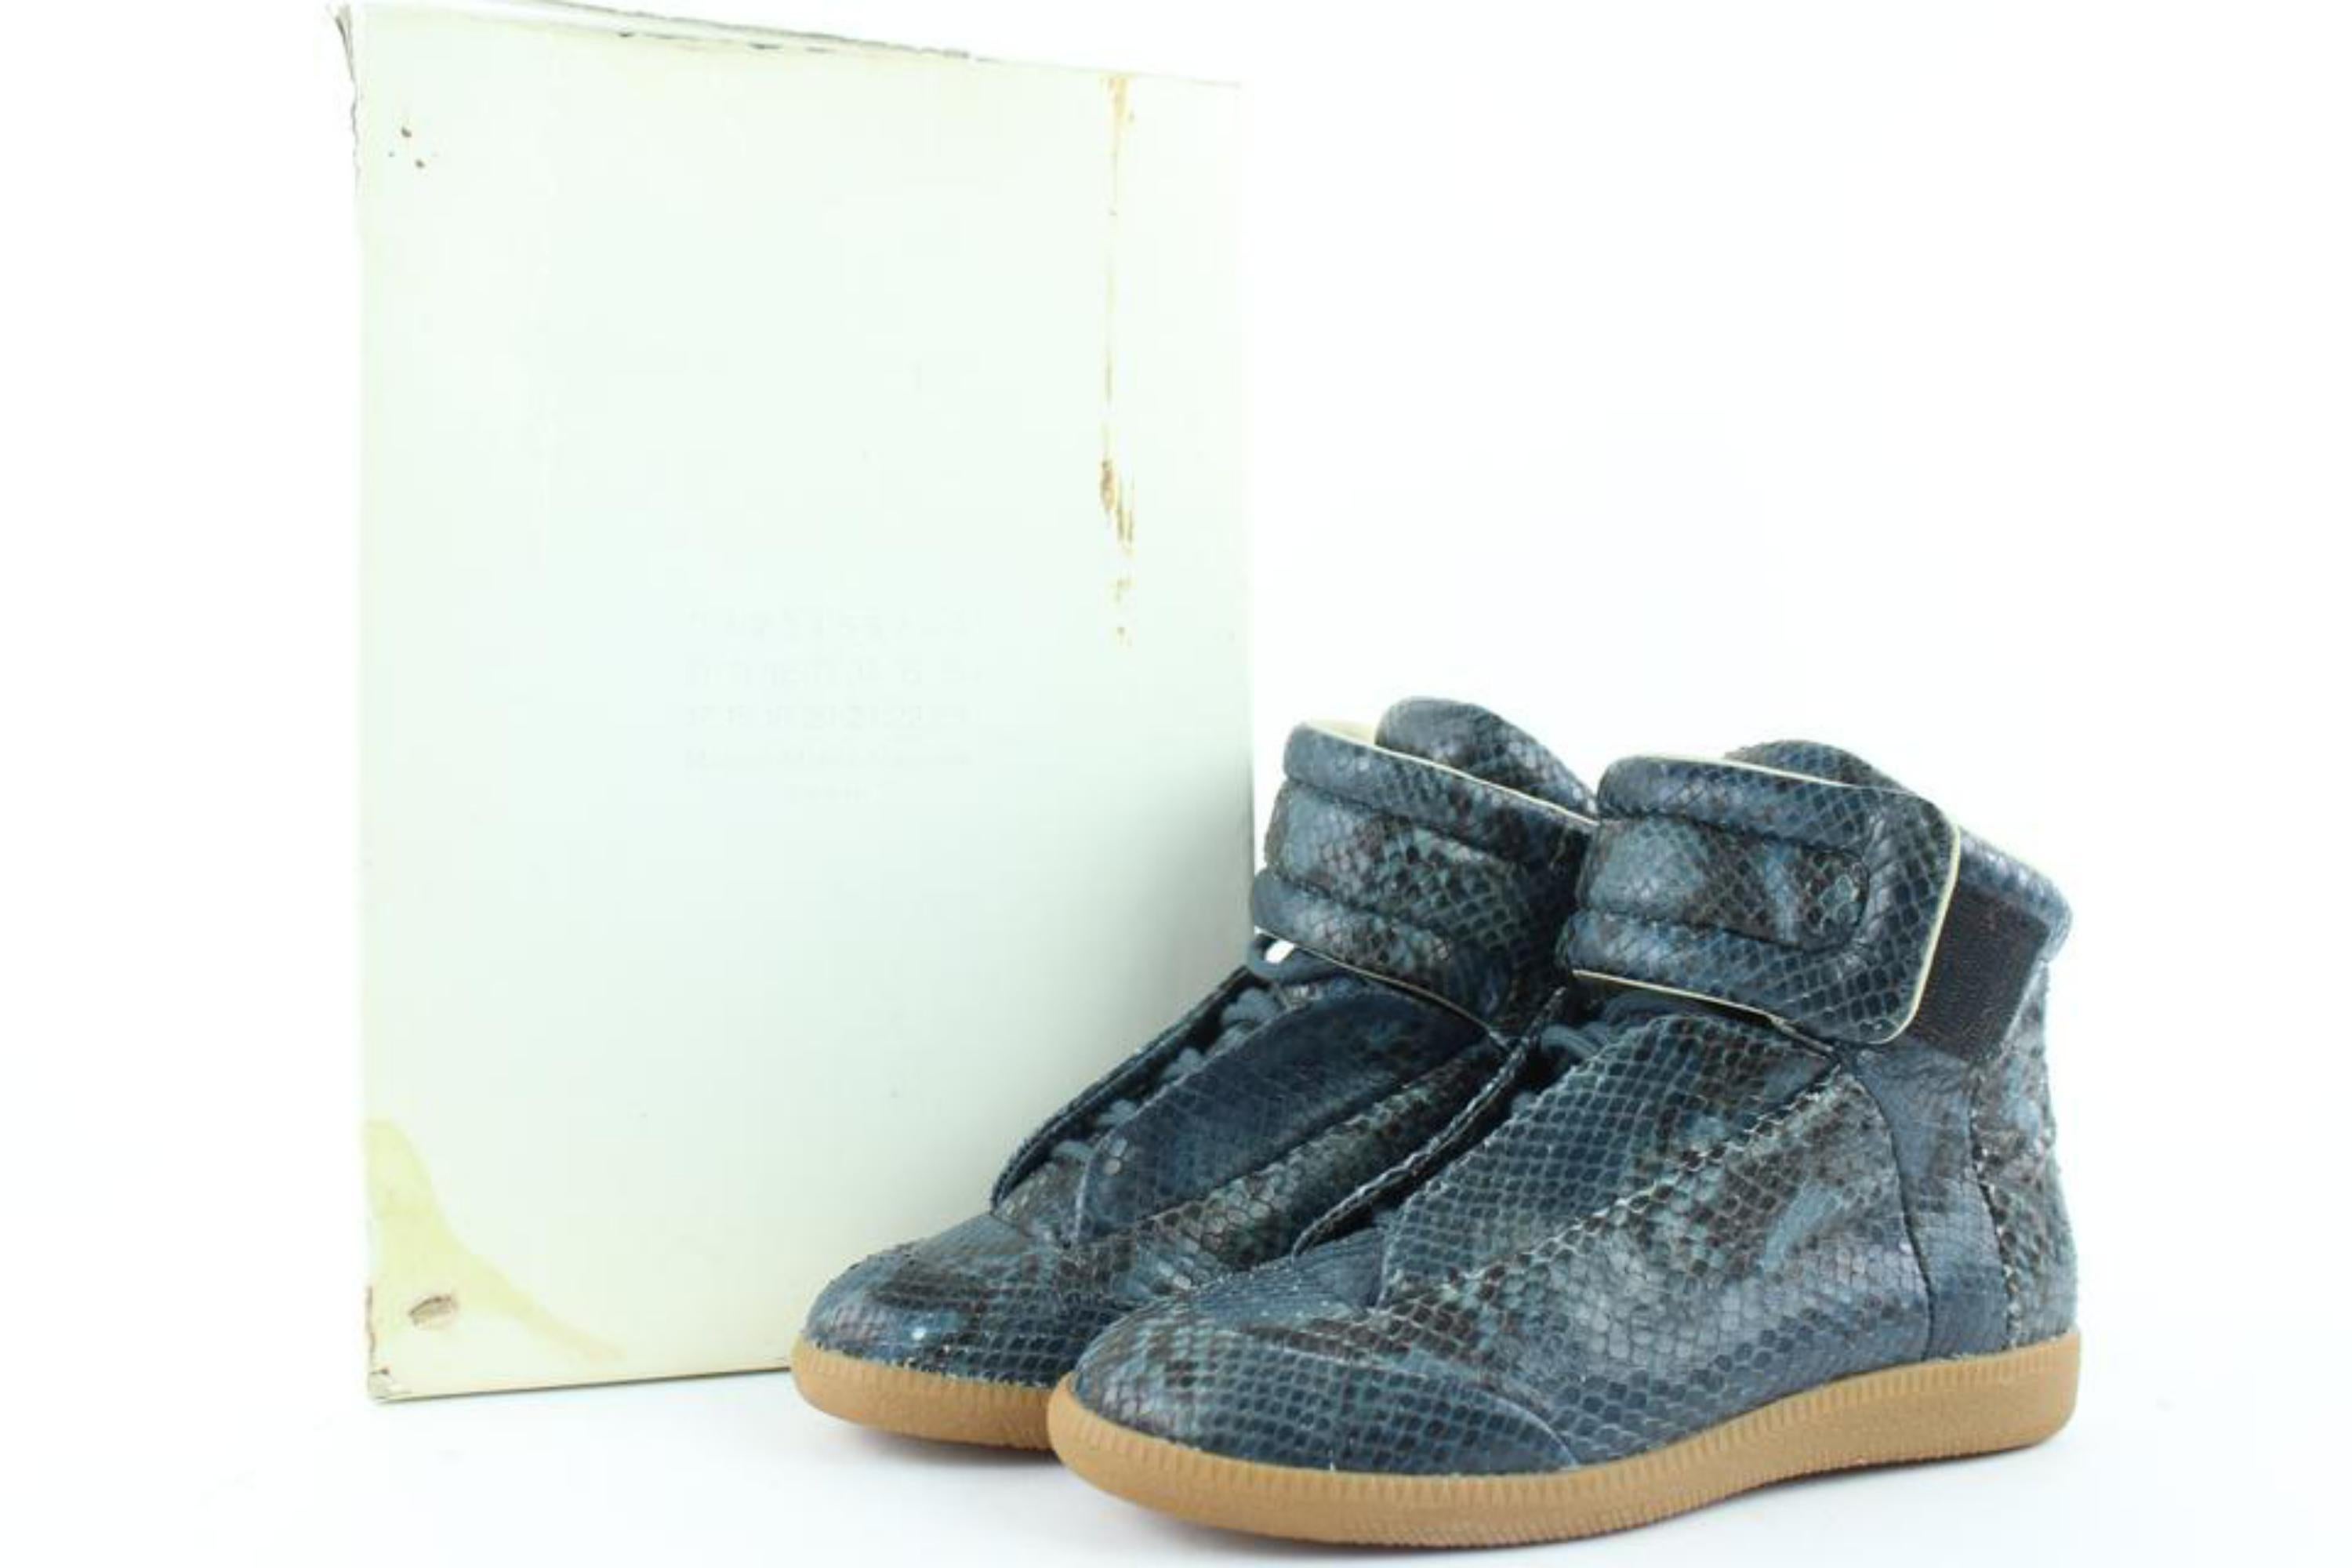 Made In: Italy
Size: 6.5
OVERALL EXCELLENT+ CONDITION
( 9.5/10 or A+ )
Includes Box
Retail $995
Signs of Wear:
Exterior: light scuffs on the piece of a pattern from python leather 
Interior: wiped off 
Sole: light scuffs 
Heel taps: light scuffs,